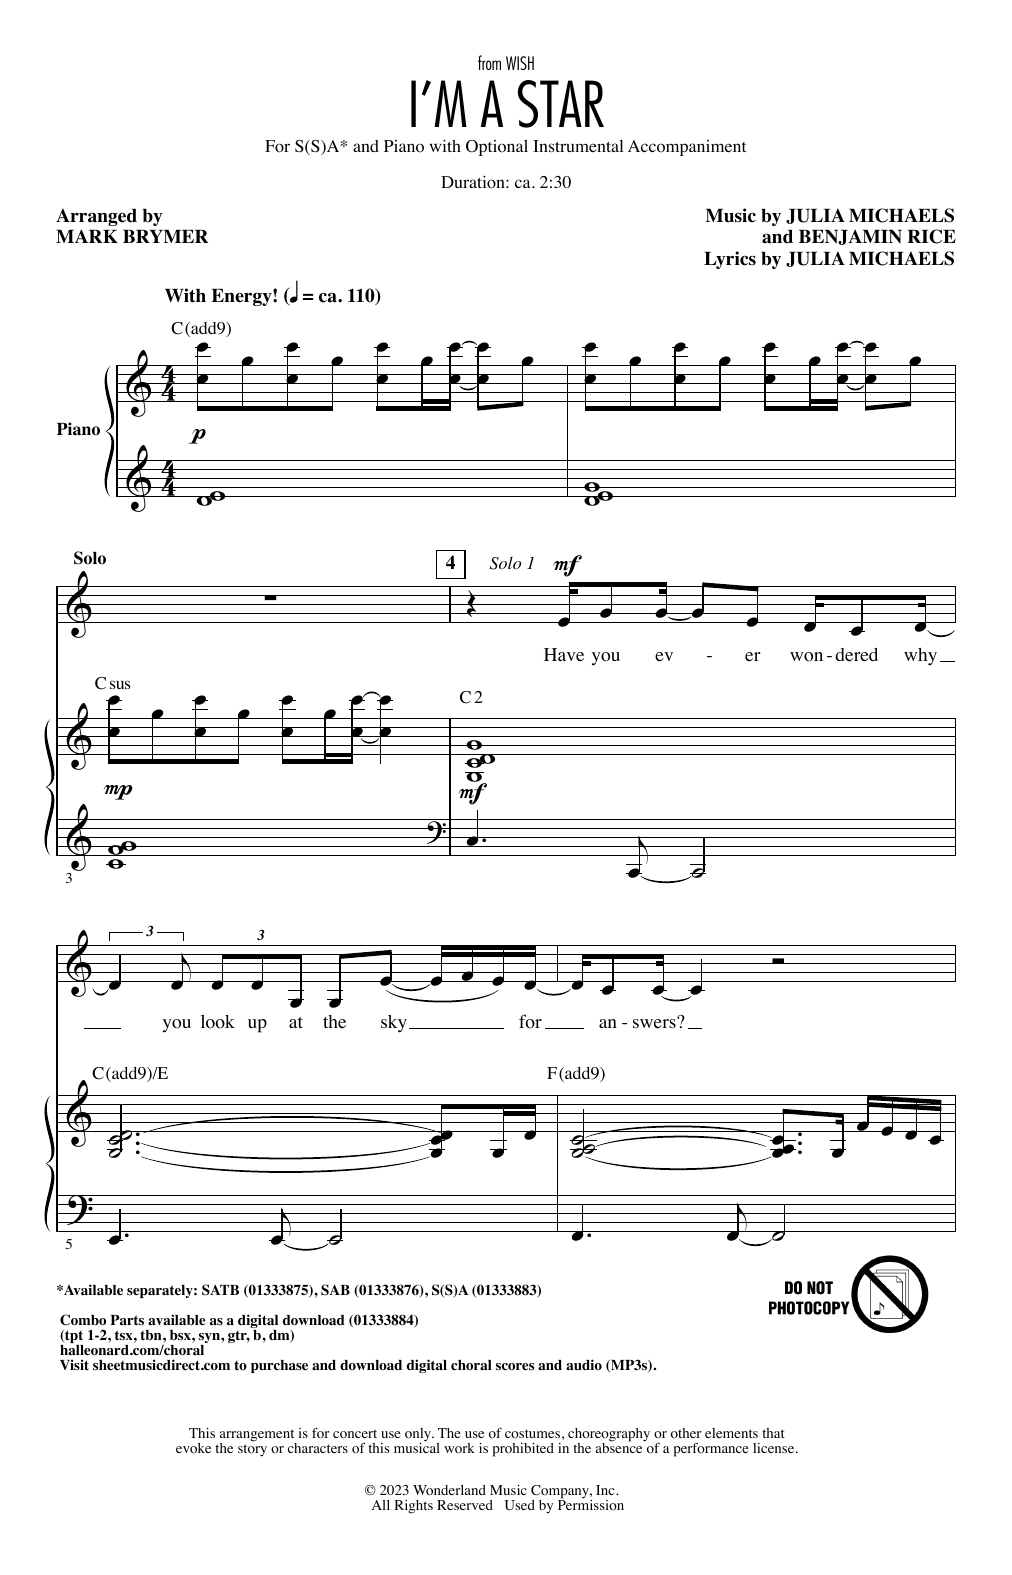 Benjamin Rice and Julia Michaels I'm A Star (from Wish) (arr. Mark Brymer) sheet music notes printable PDF score